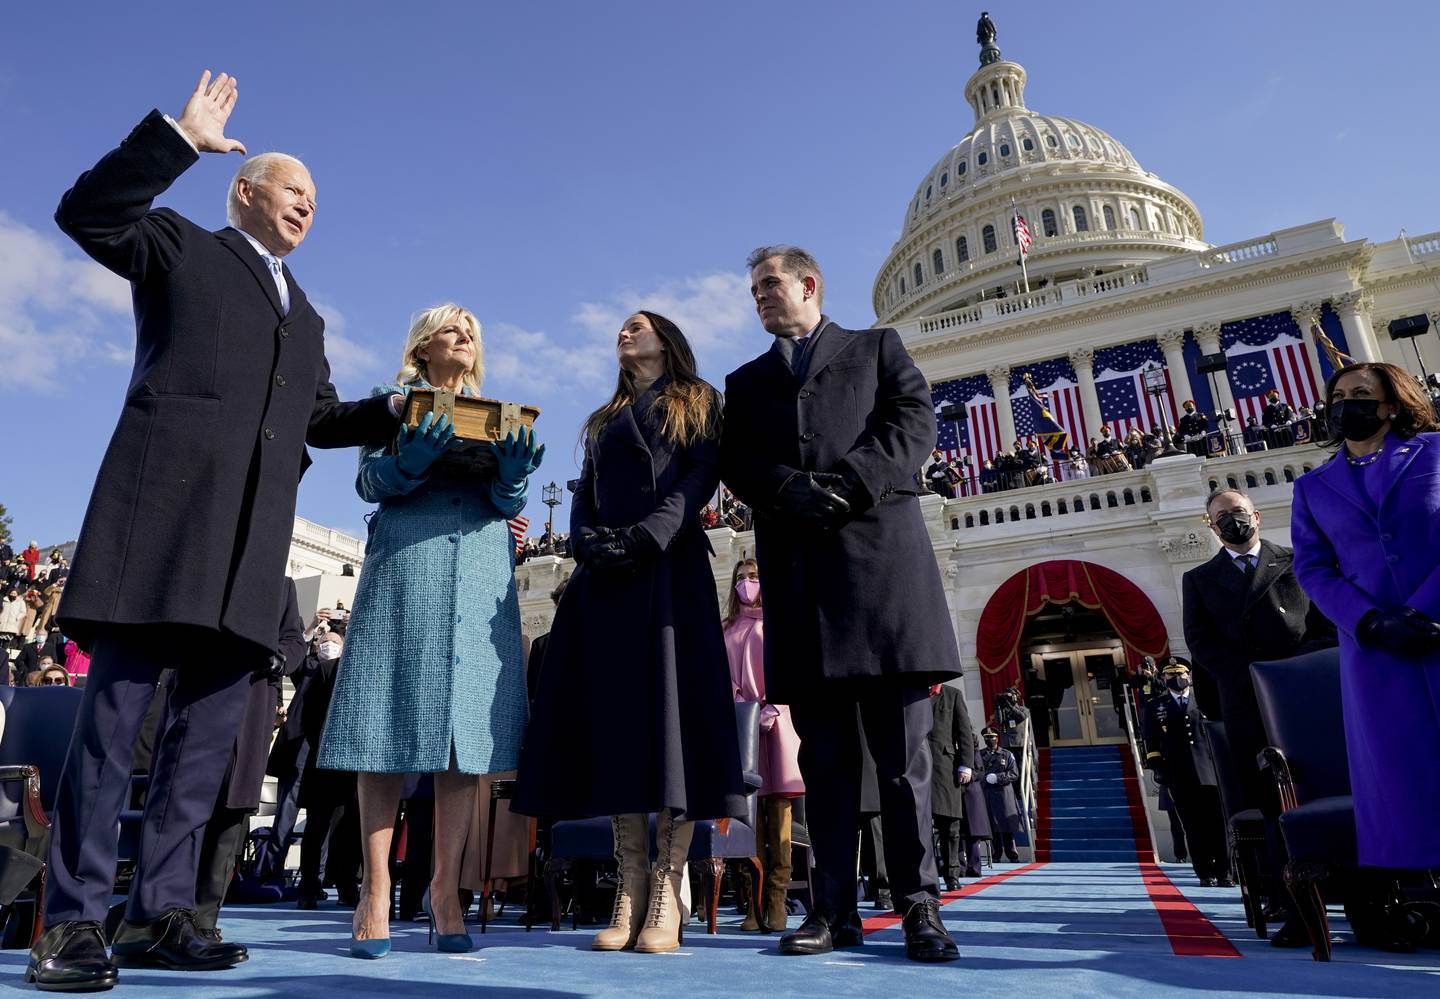 Joe Biden is sworn in as the 46th President of the United States by Chief Justice John Roberts as Jill Biden holds the Bible in Washington last year. AP Photo